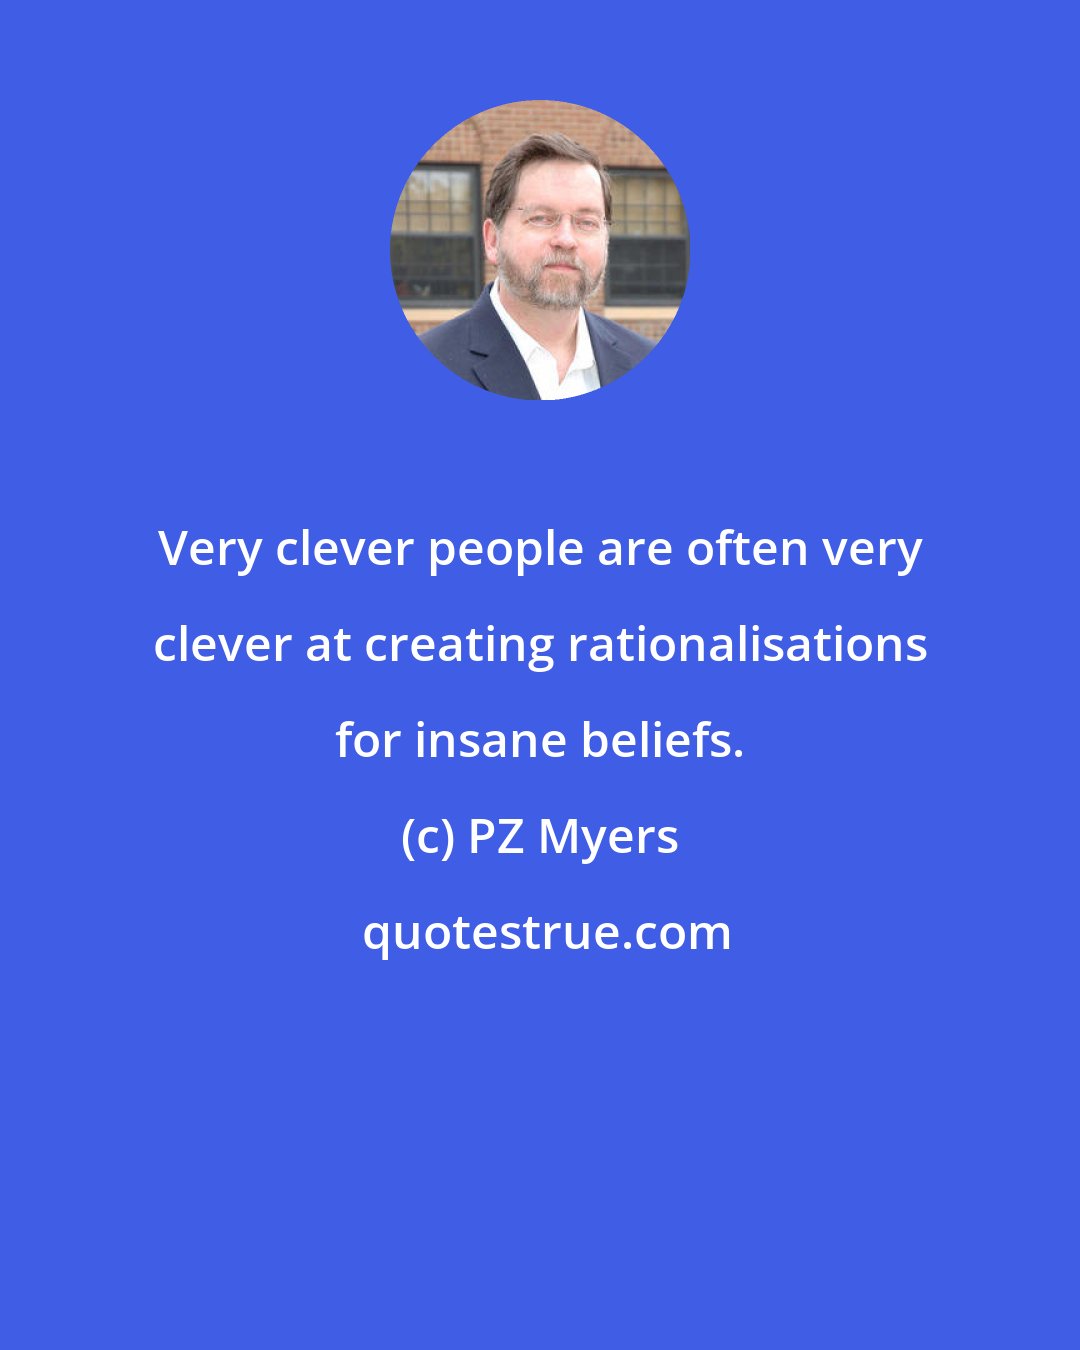 PZ Myers: Very clever people are often very clever at creating rationalisations for insane beliefs.